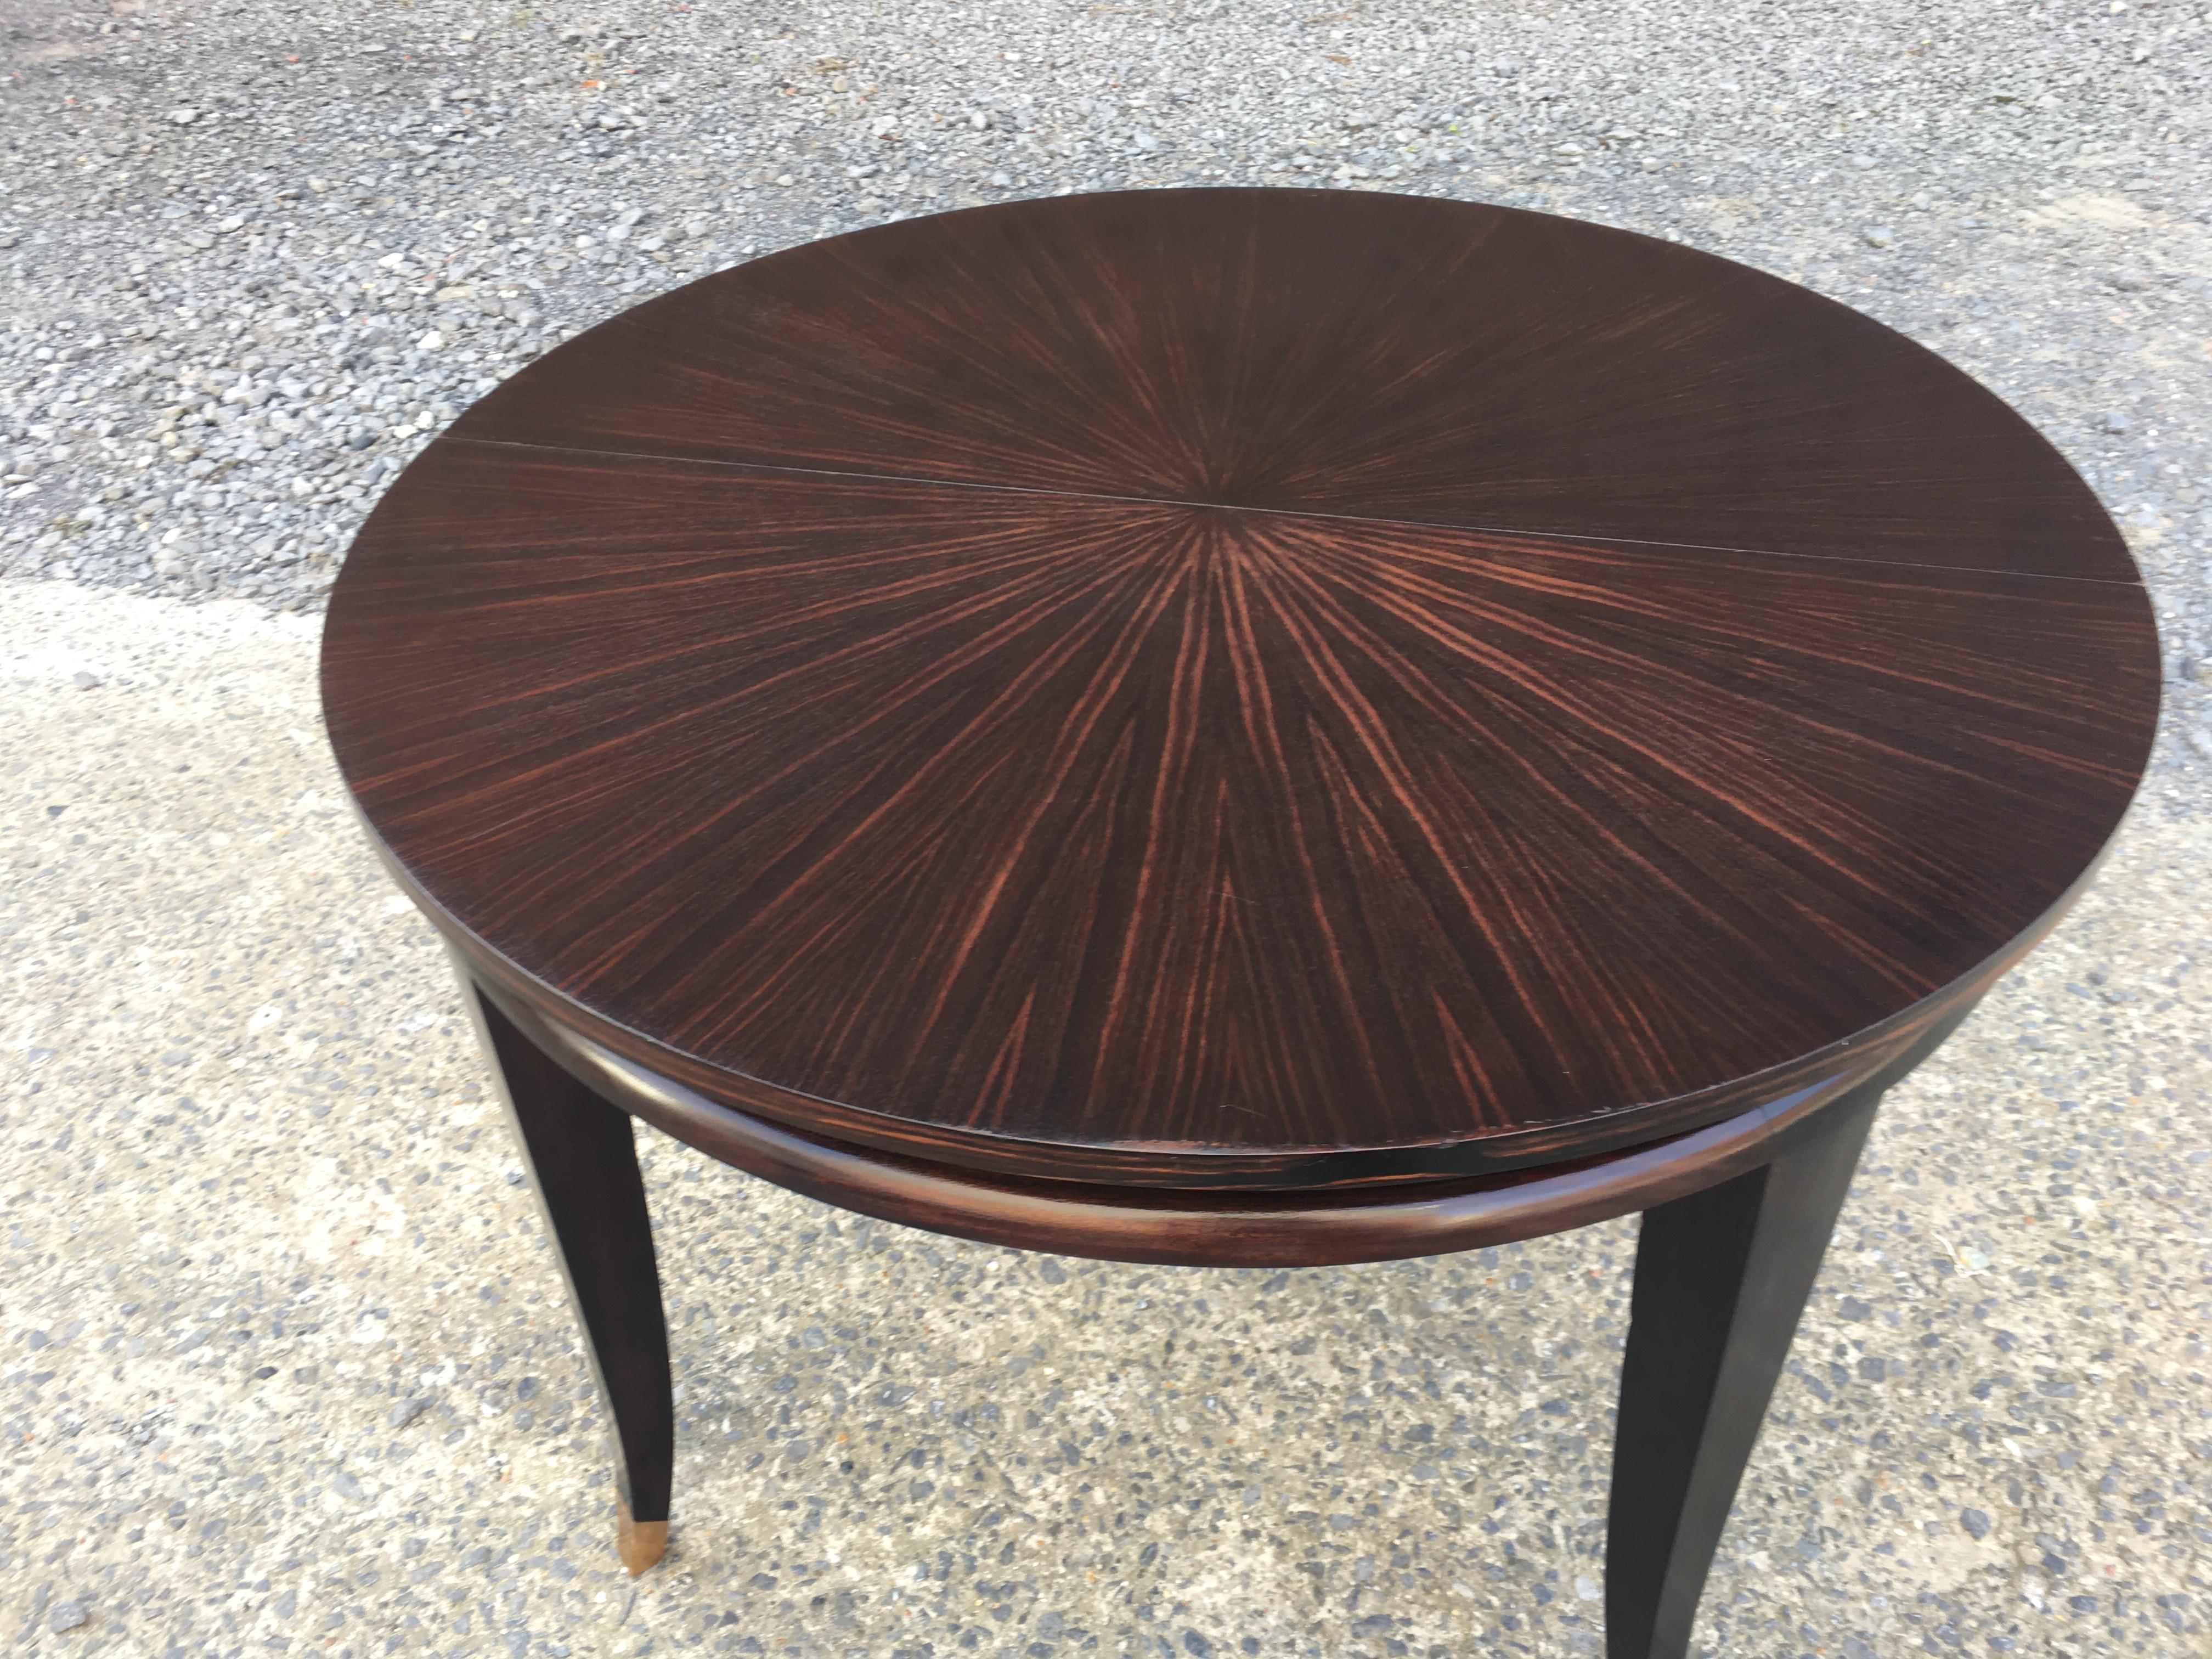 Maxime Old Attributed, Art Deco Table in Macassar Ebony Veneer, circa 1940 For Sale 3